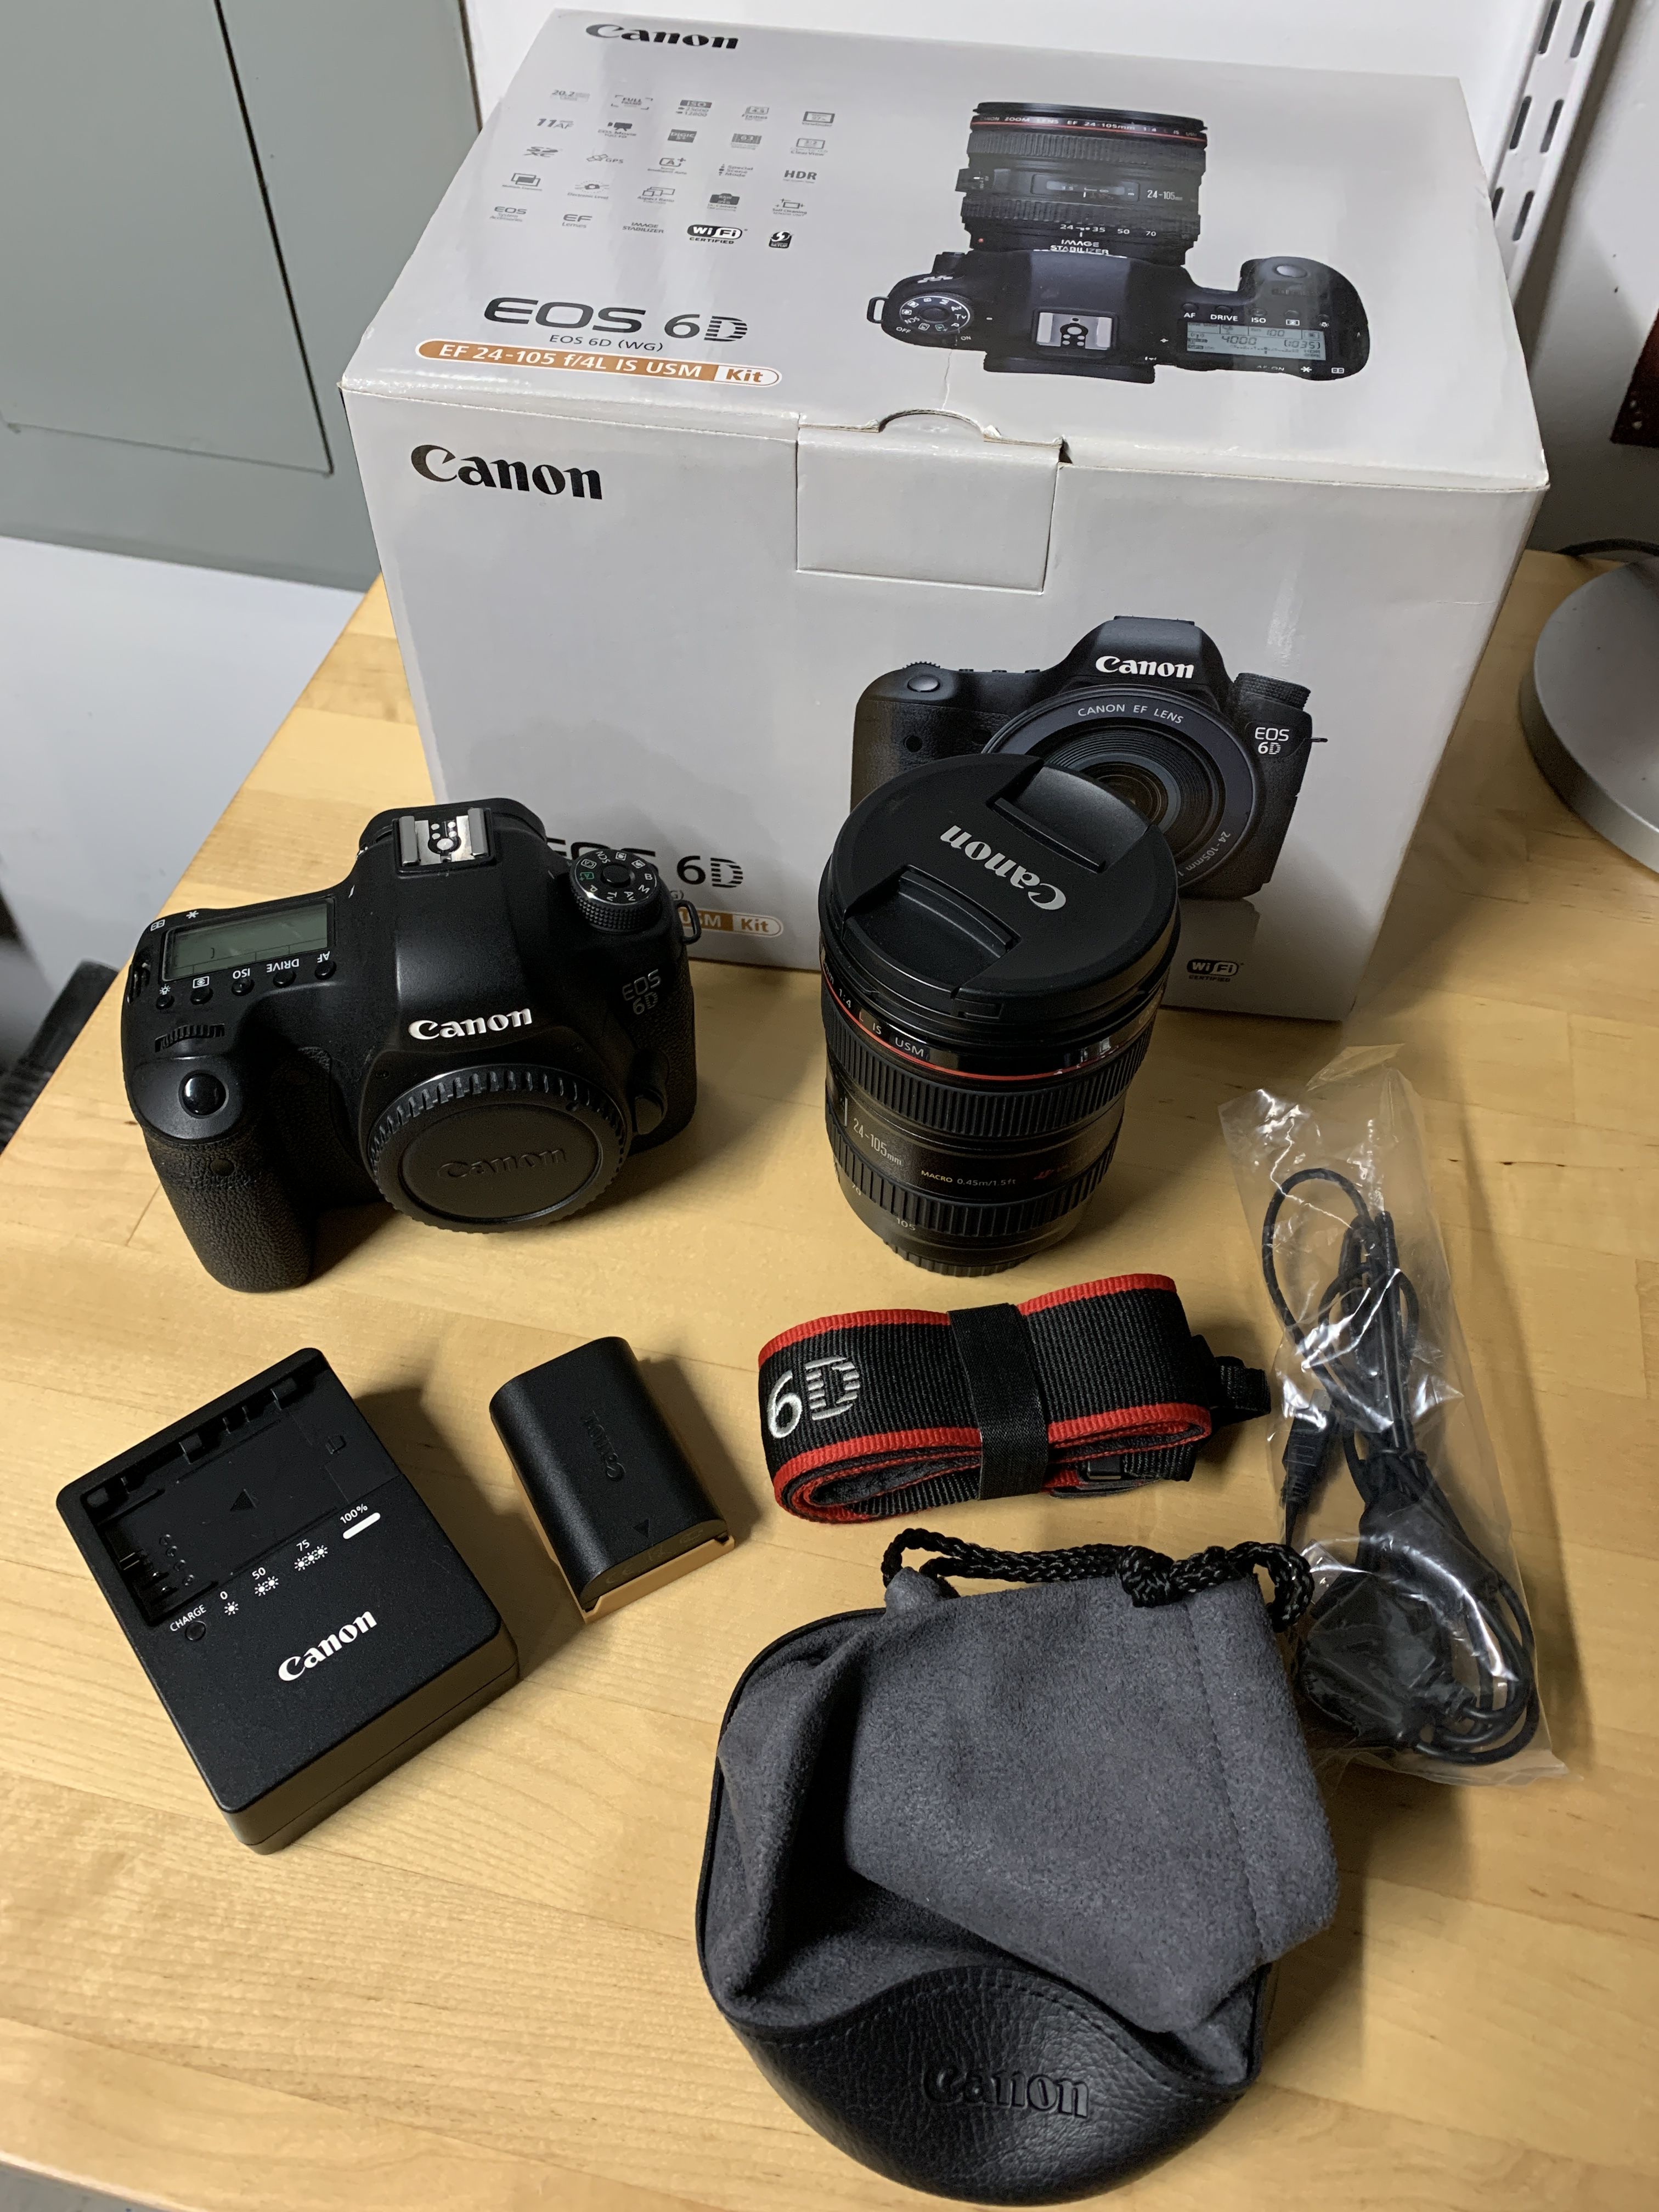 Canon Full Frame EOS 6D with EF 24-105 f/4 L IS USM